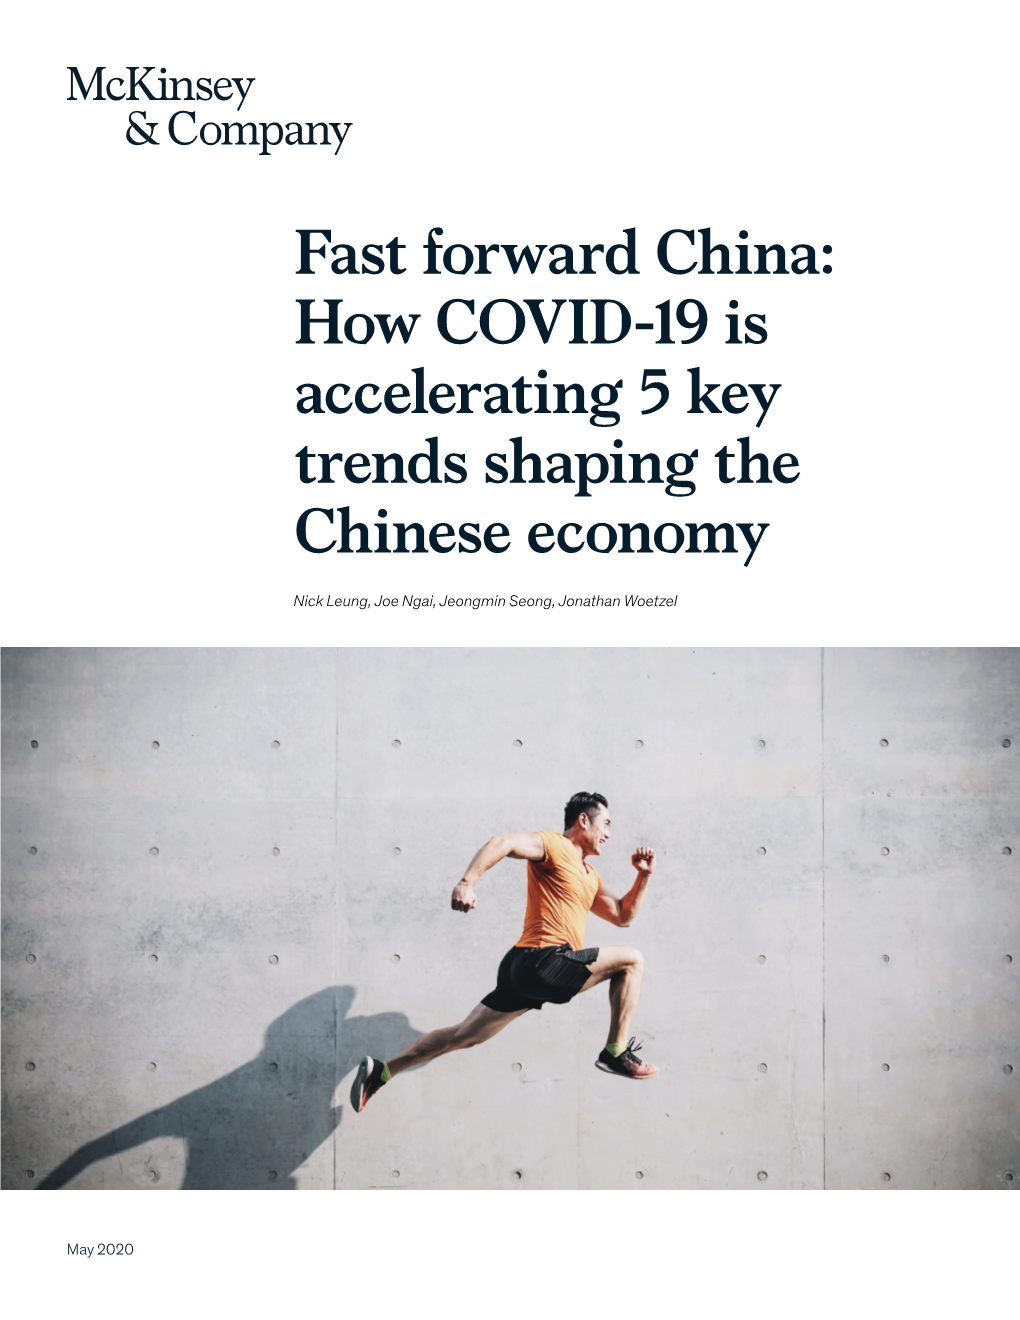 Fast-Forward China: How COVID-19 Is Accelerating Five Key Trends Shaping the Chinese Economy